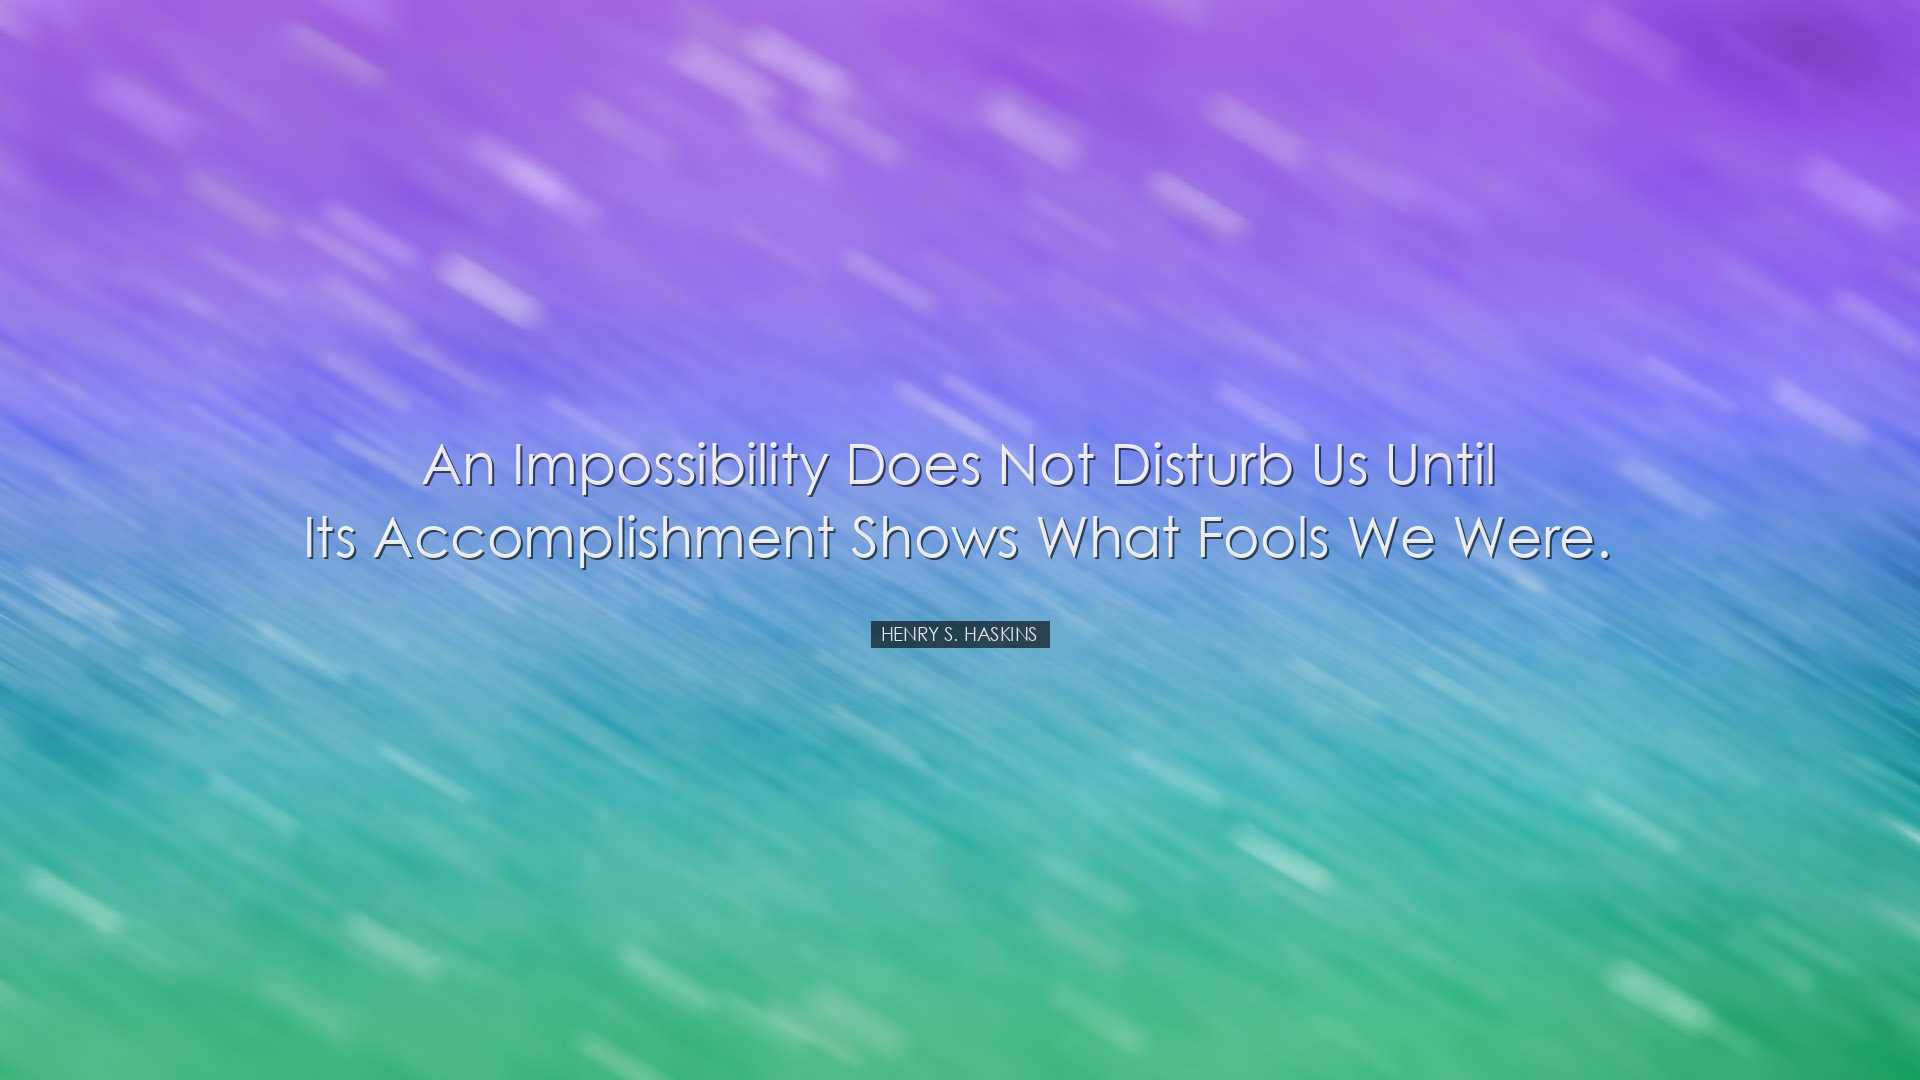 An impossibility does not disturb us until its accomplishment show